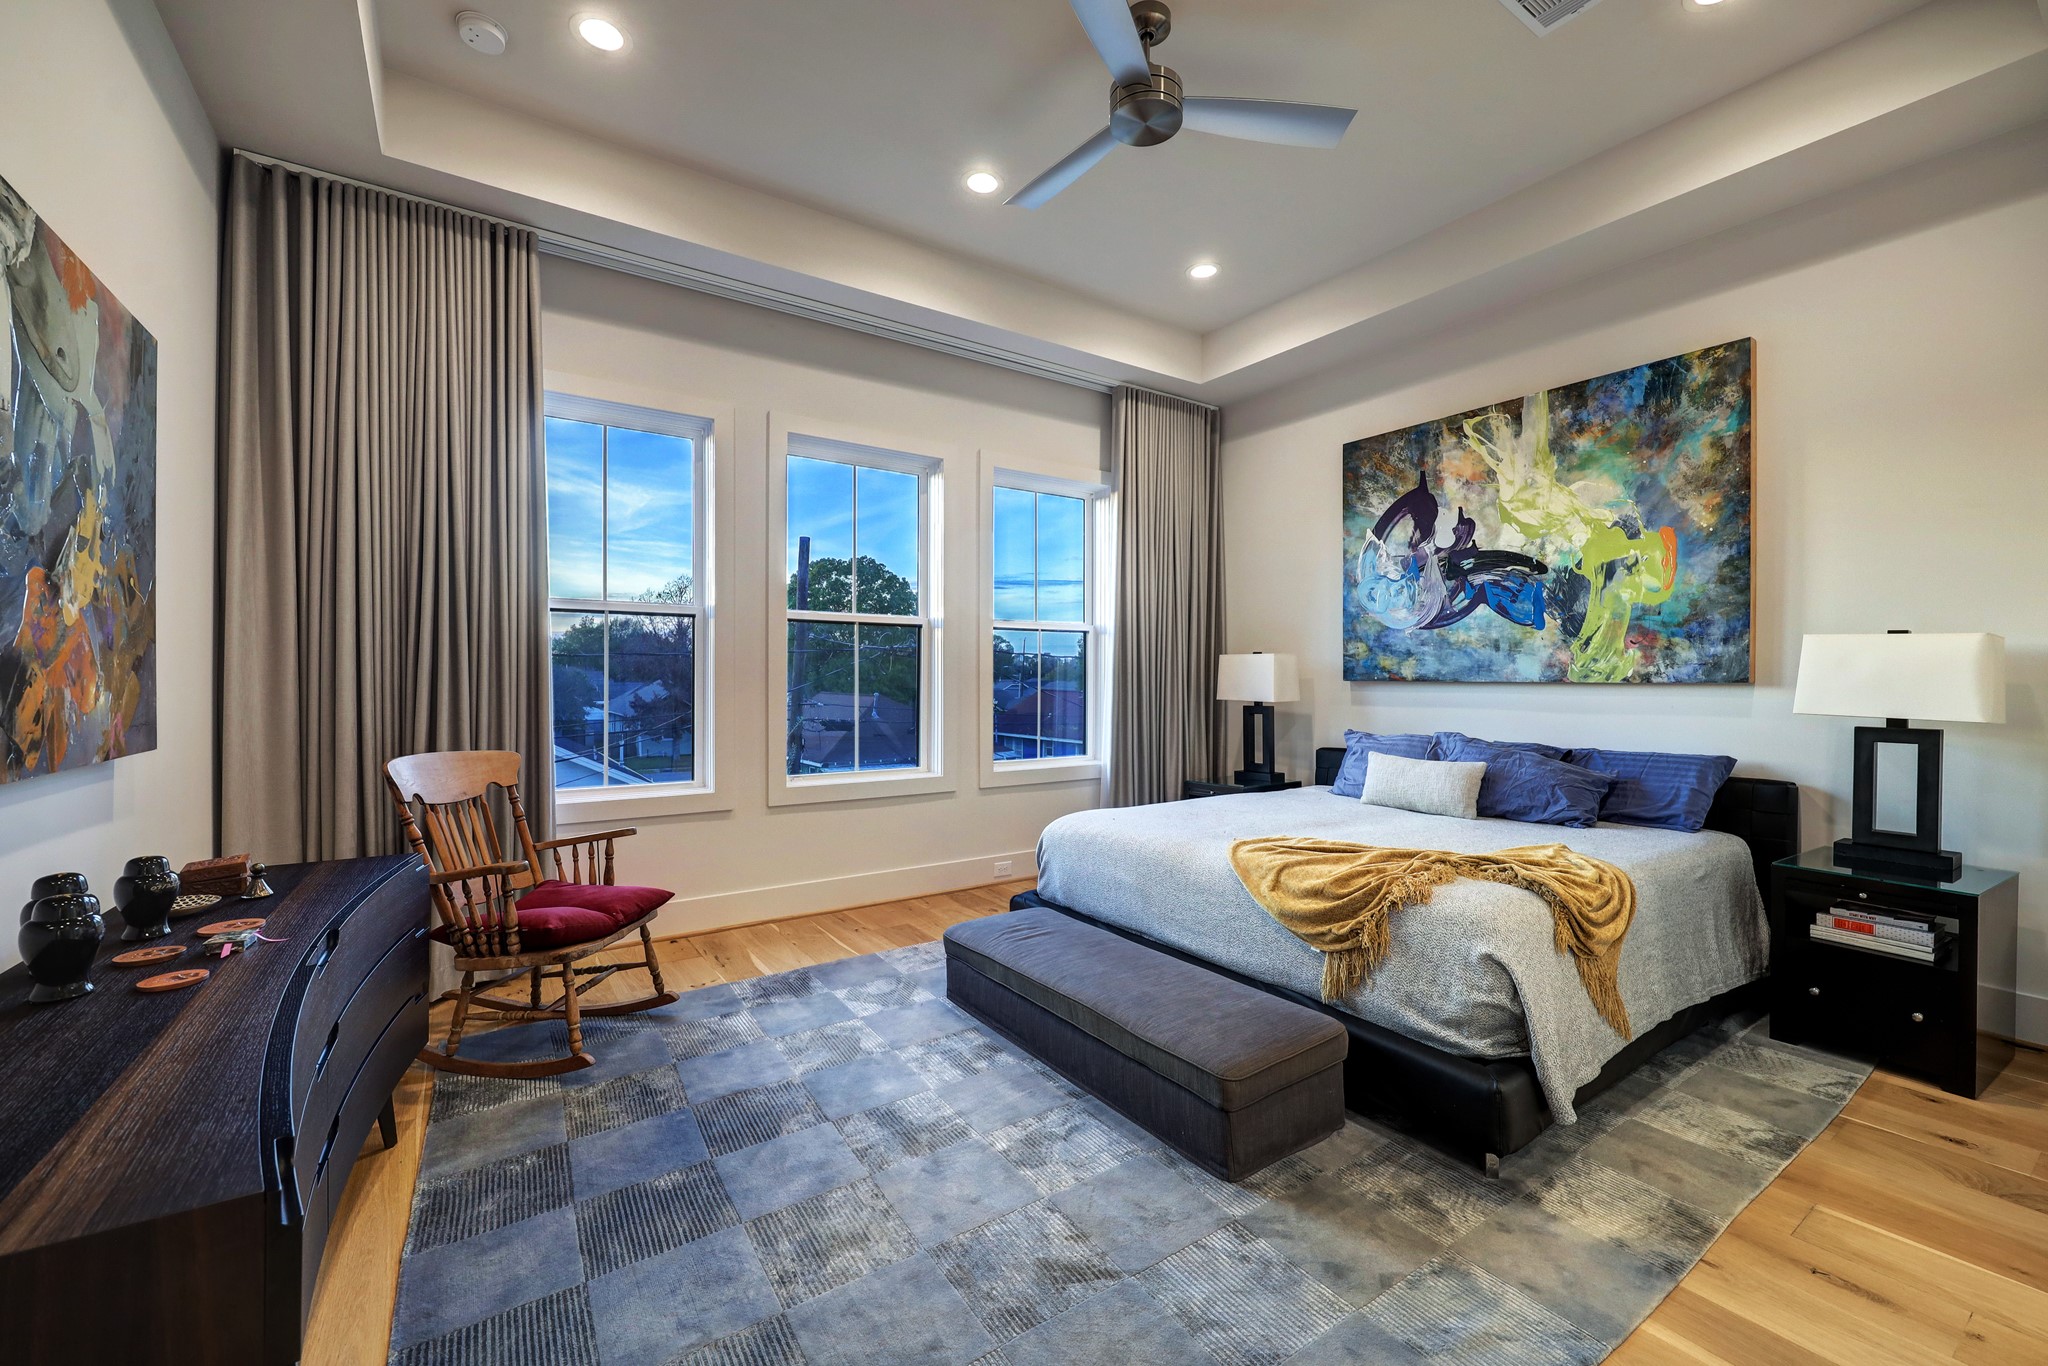 Sleep soundly in the expansive owner's suite, where a trio of large windows overlooks the backyard. A tray ceiling with recessed lighting and a ceiling fan rises overhead.